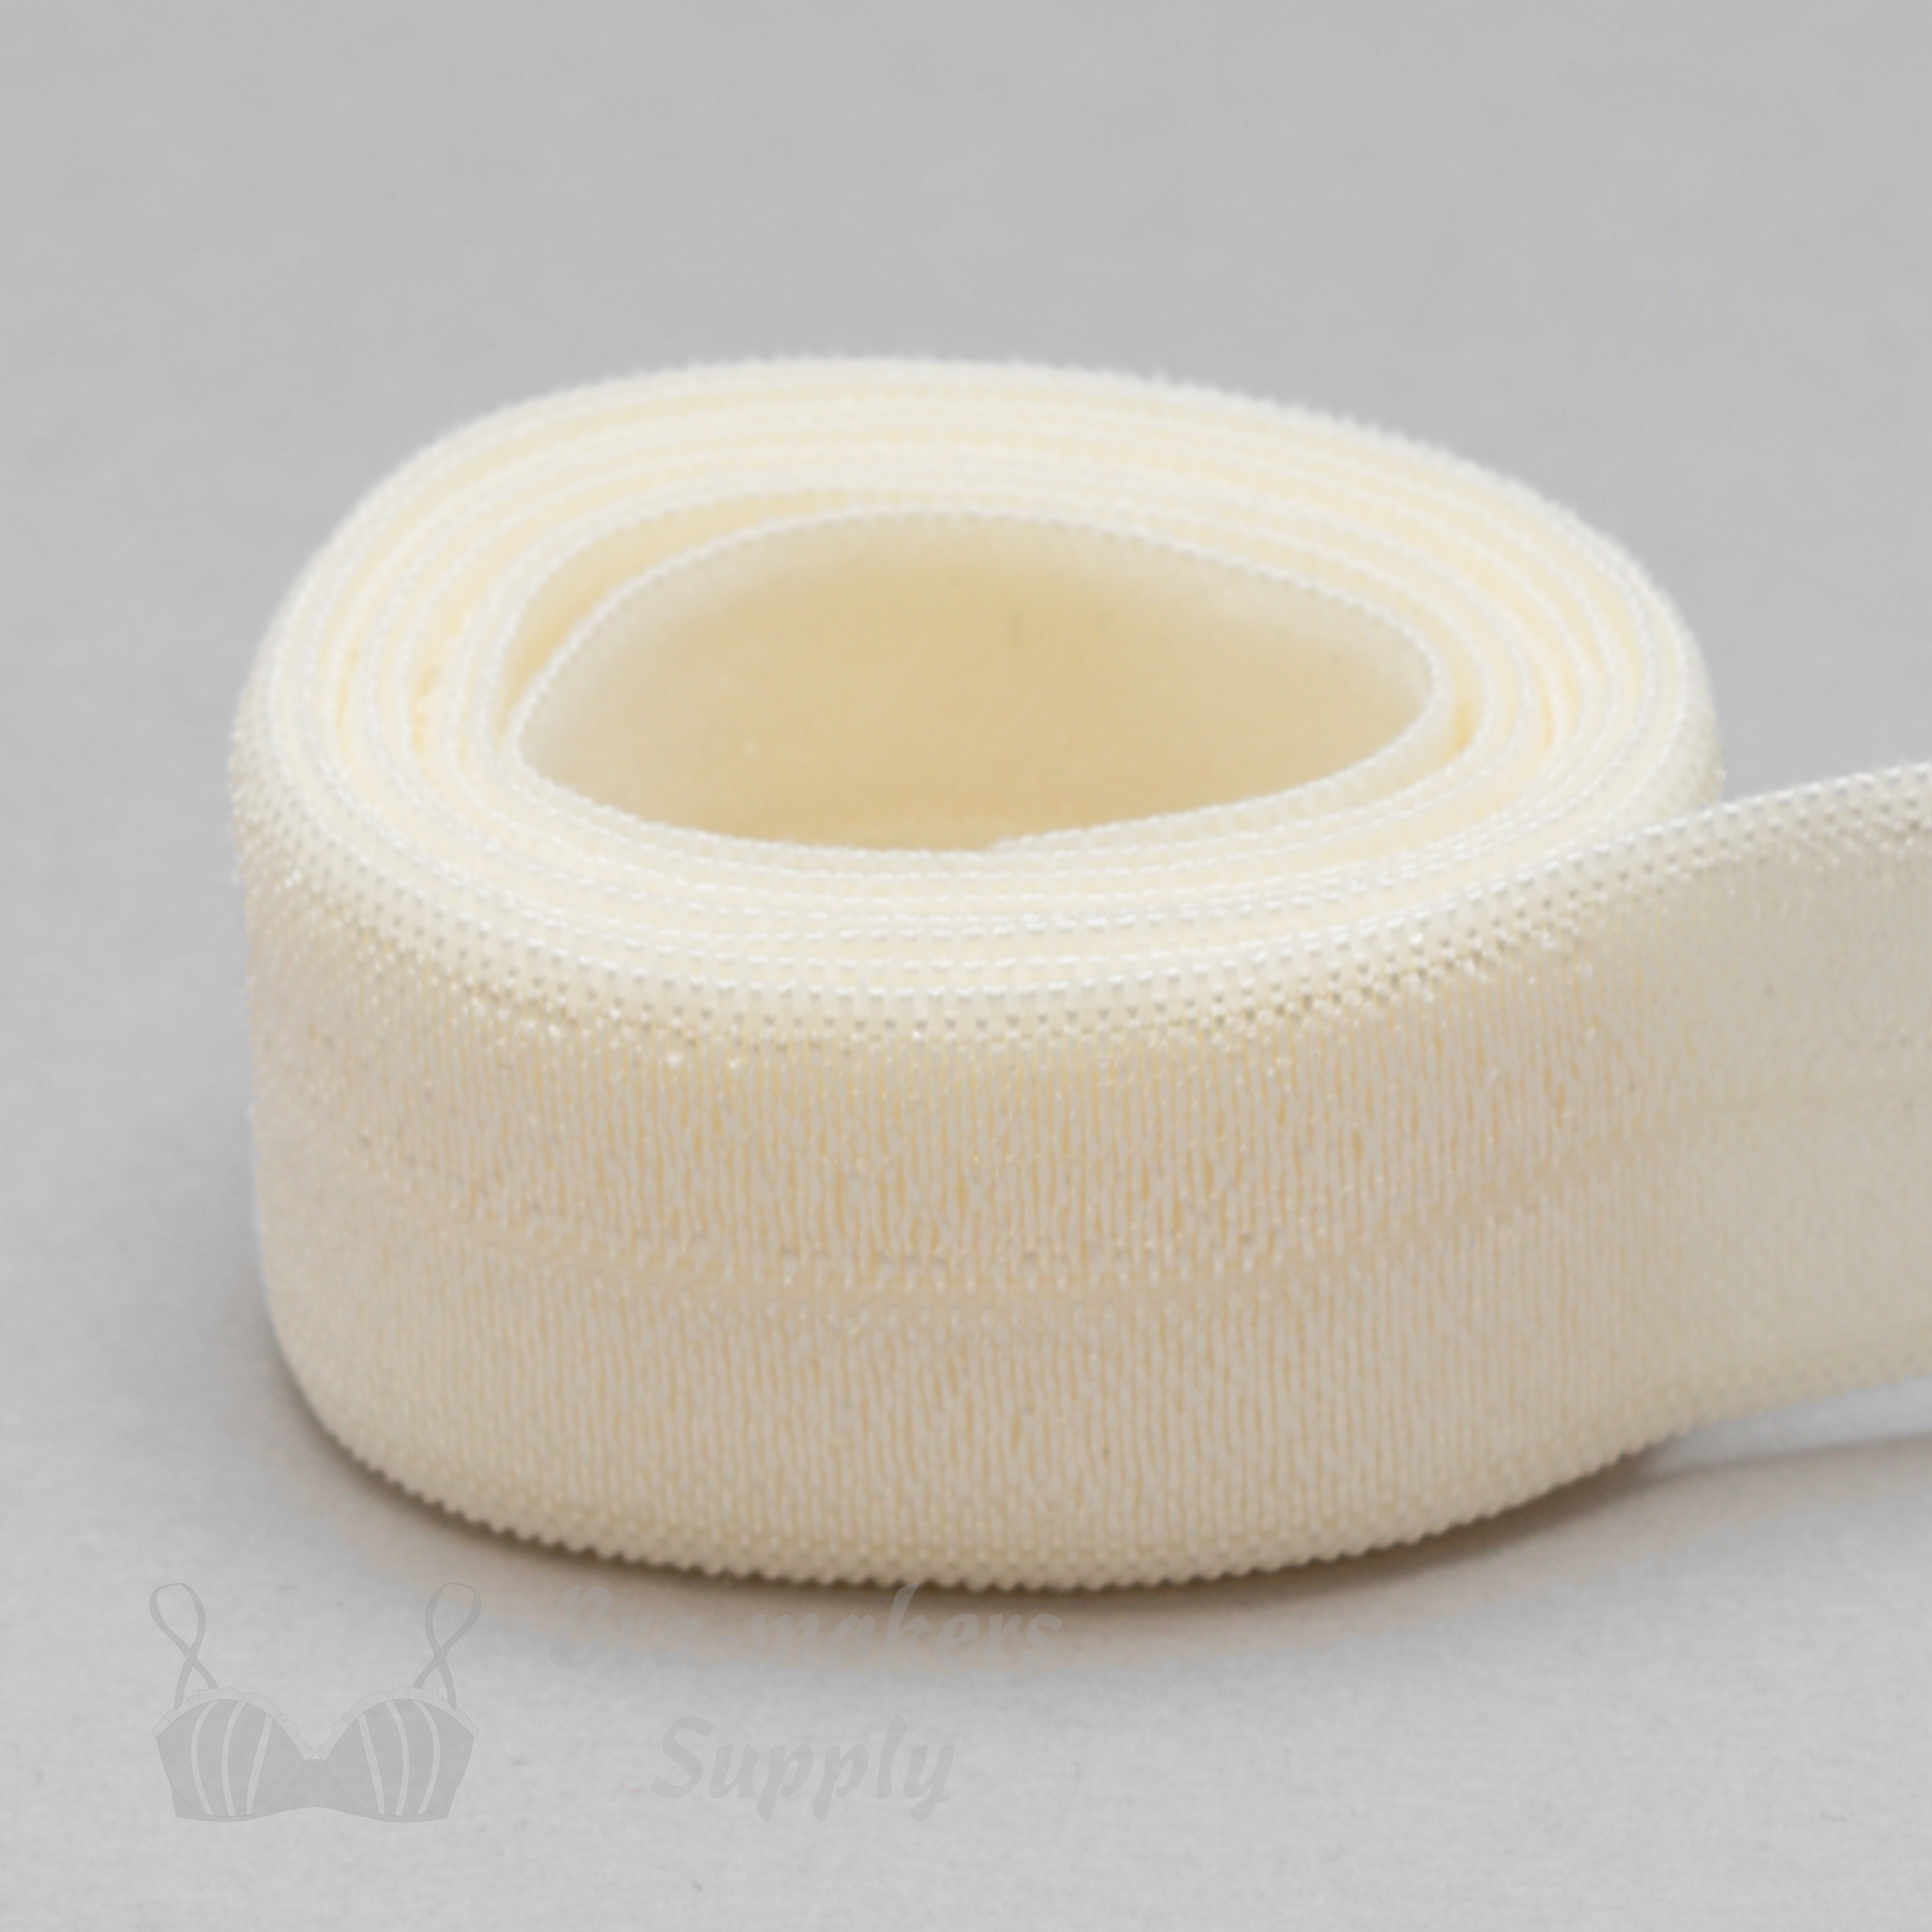 reversible fold-over elastic binding EF-5 ivory or Pantone 11-0507 winter white from Bra-Makers Supply 1 metre roll shown